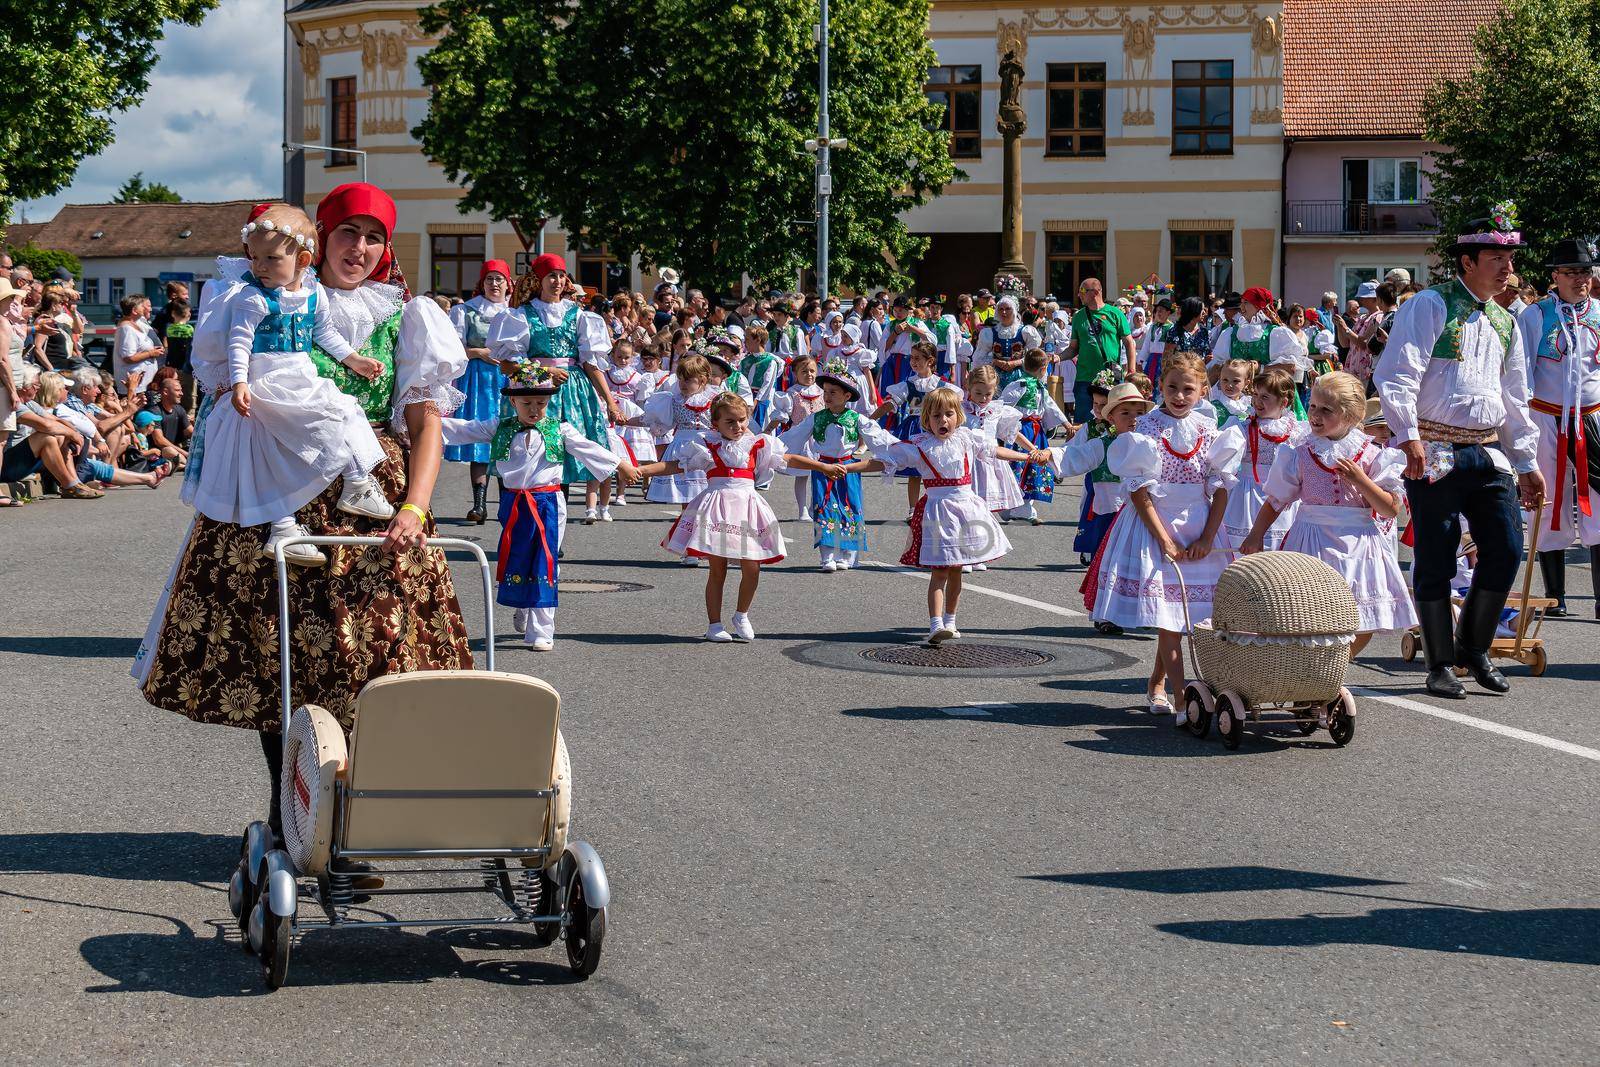 Children and women with strollers in traditional costumes by rostik924